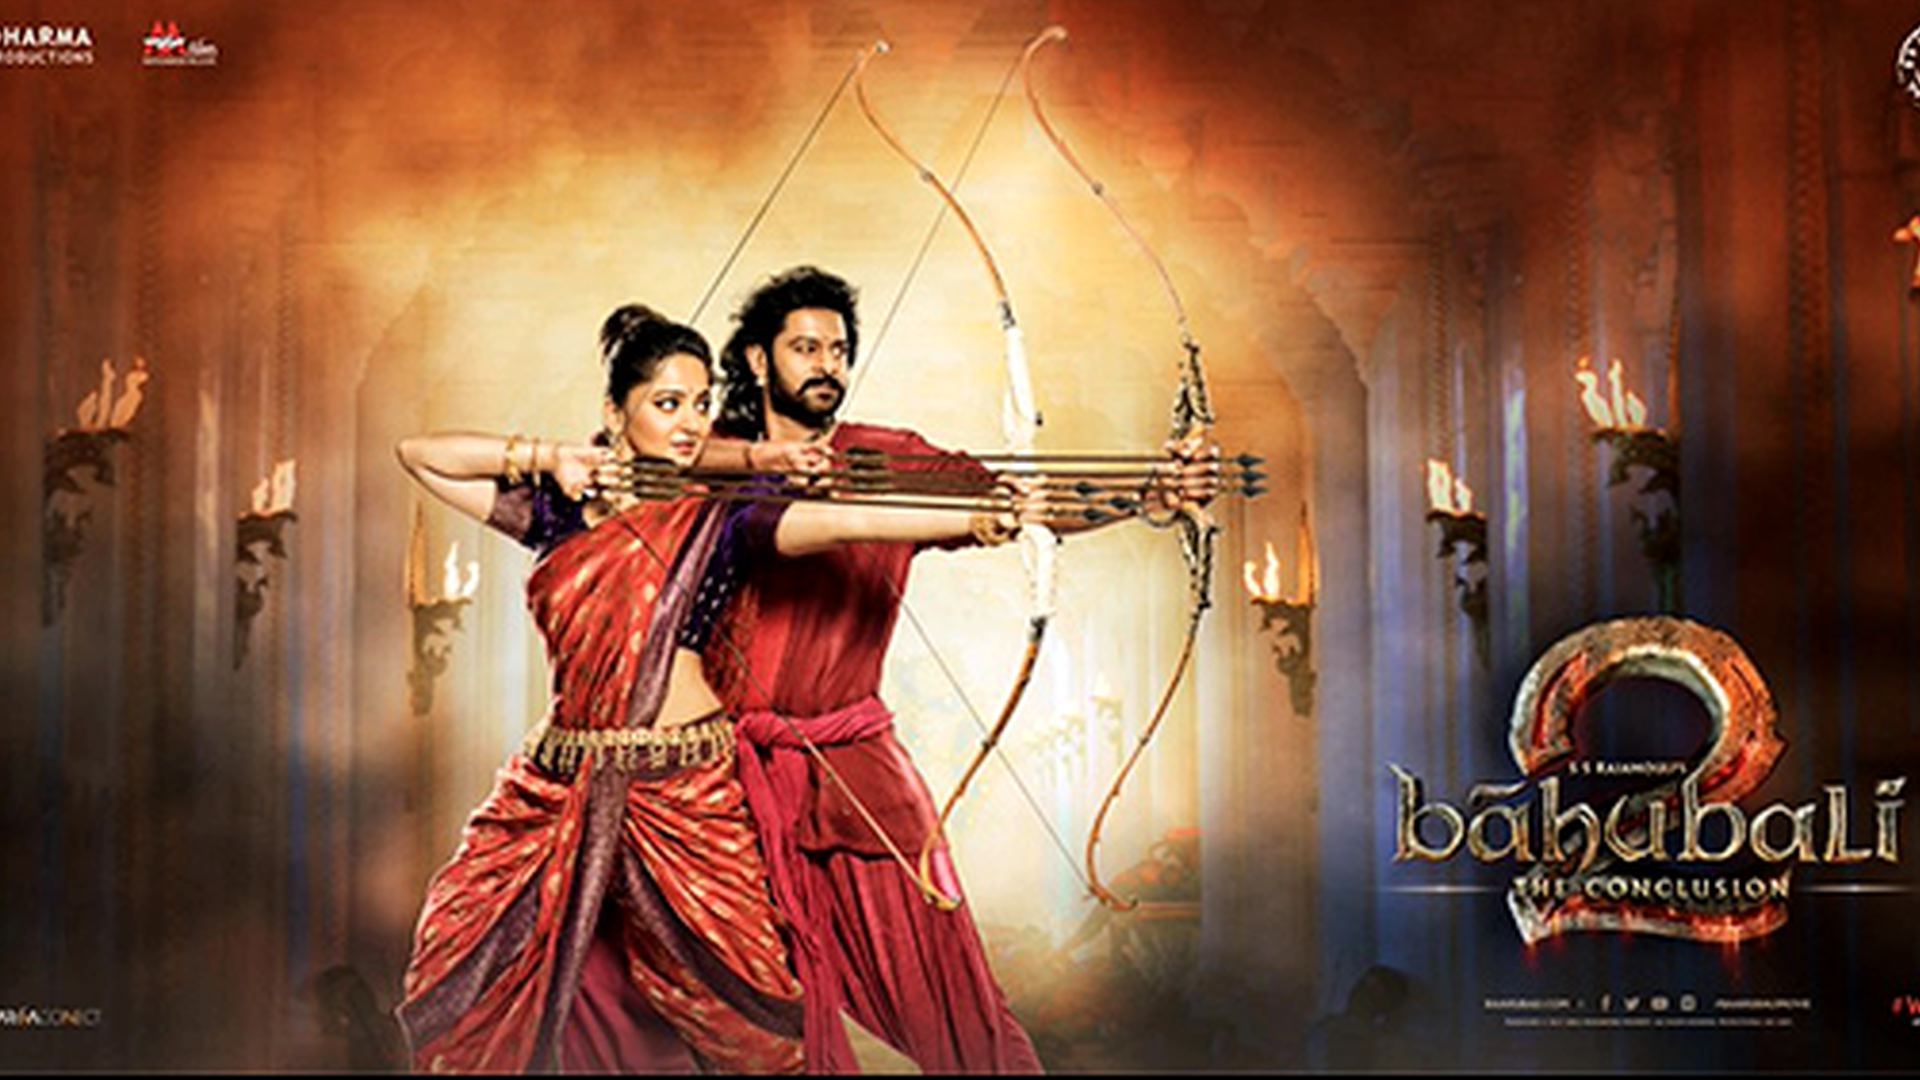 Baahubali 2 Review: Fantasy-esque brilliant finale but a drag at times